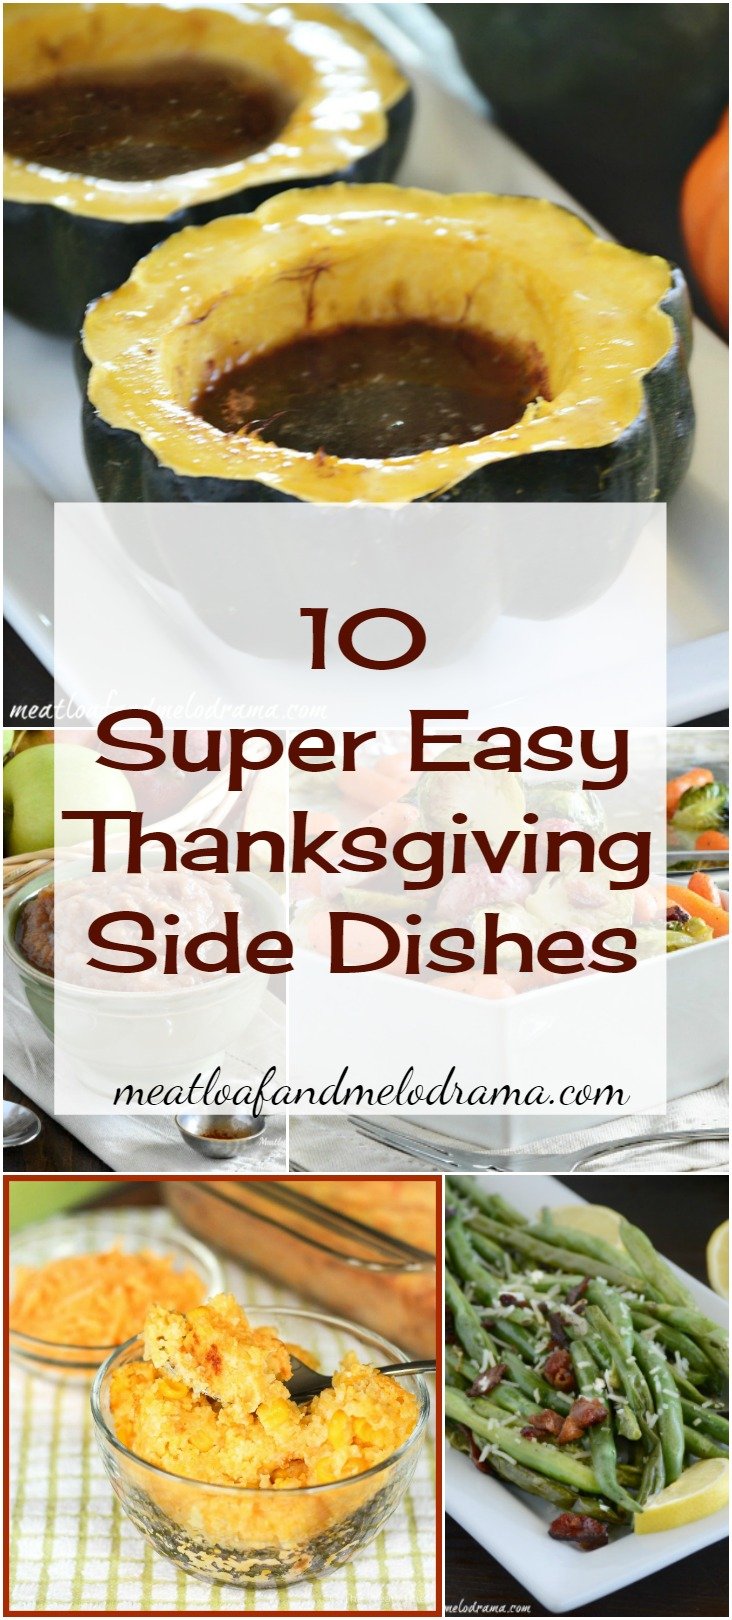 10 Super Easy Thanksgiving Side Dishes